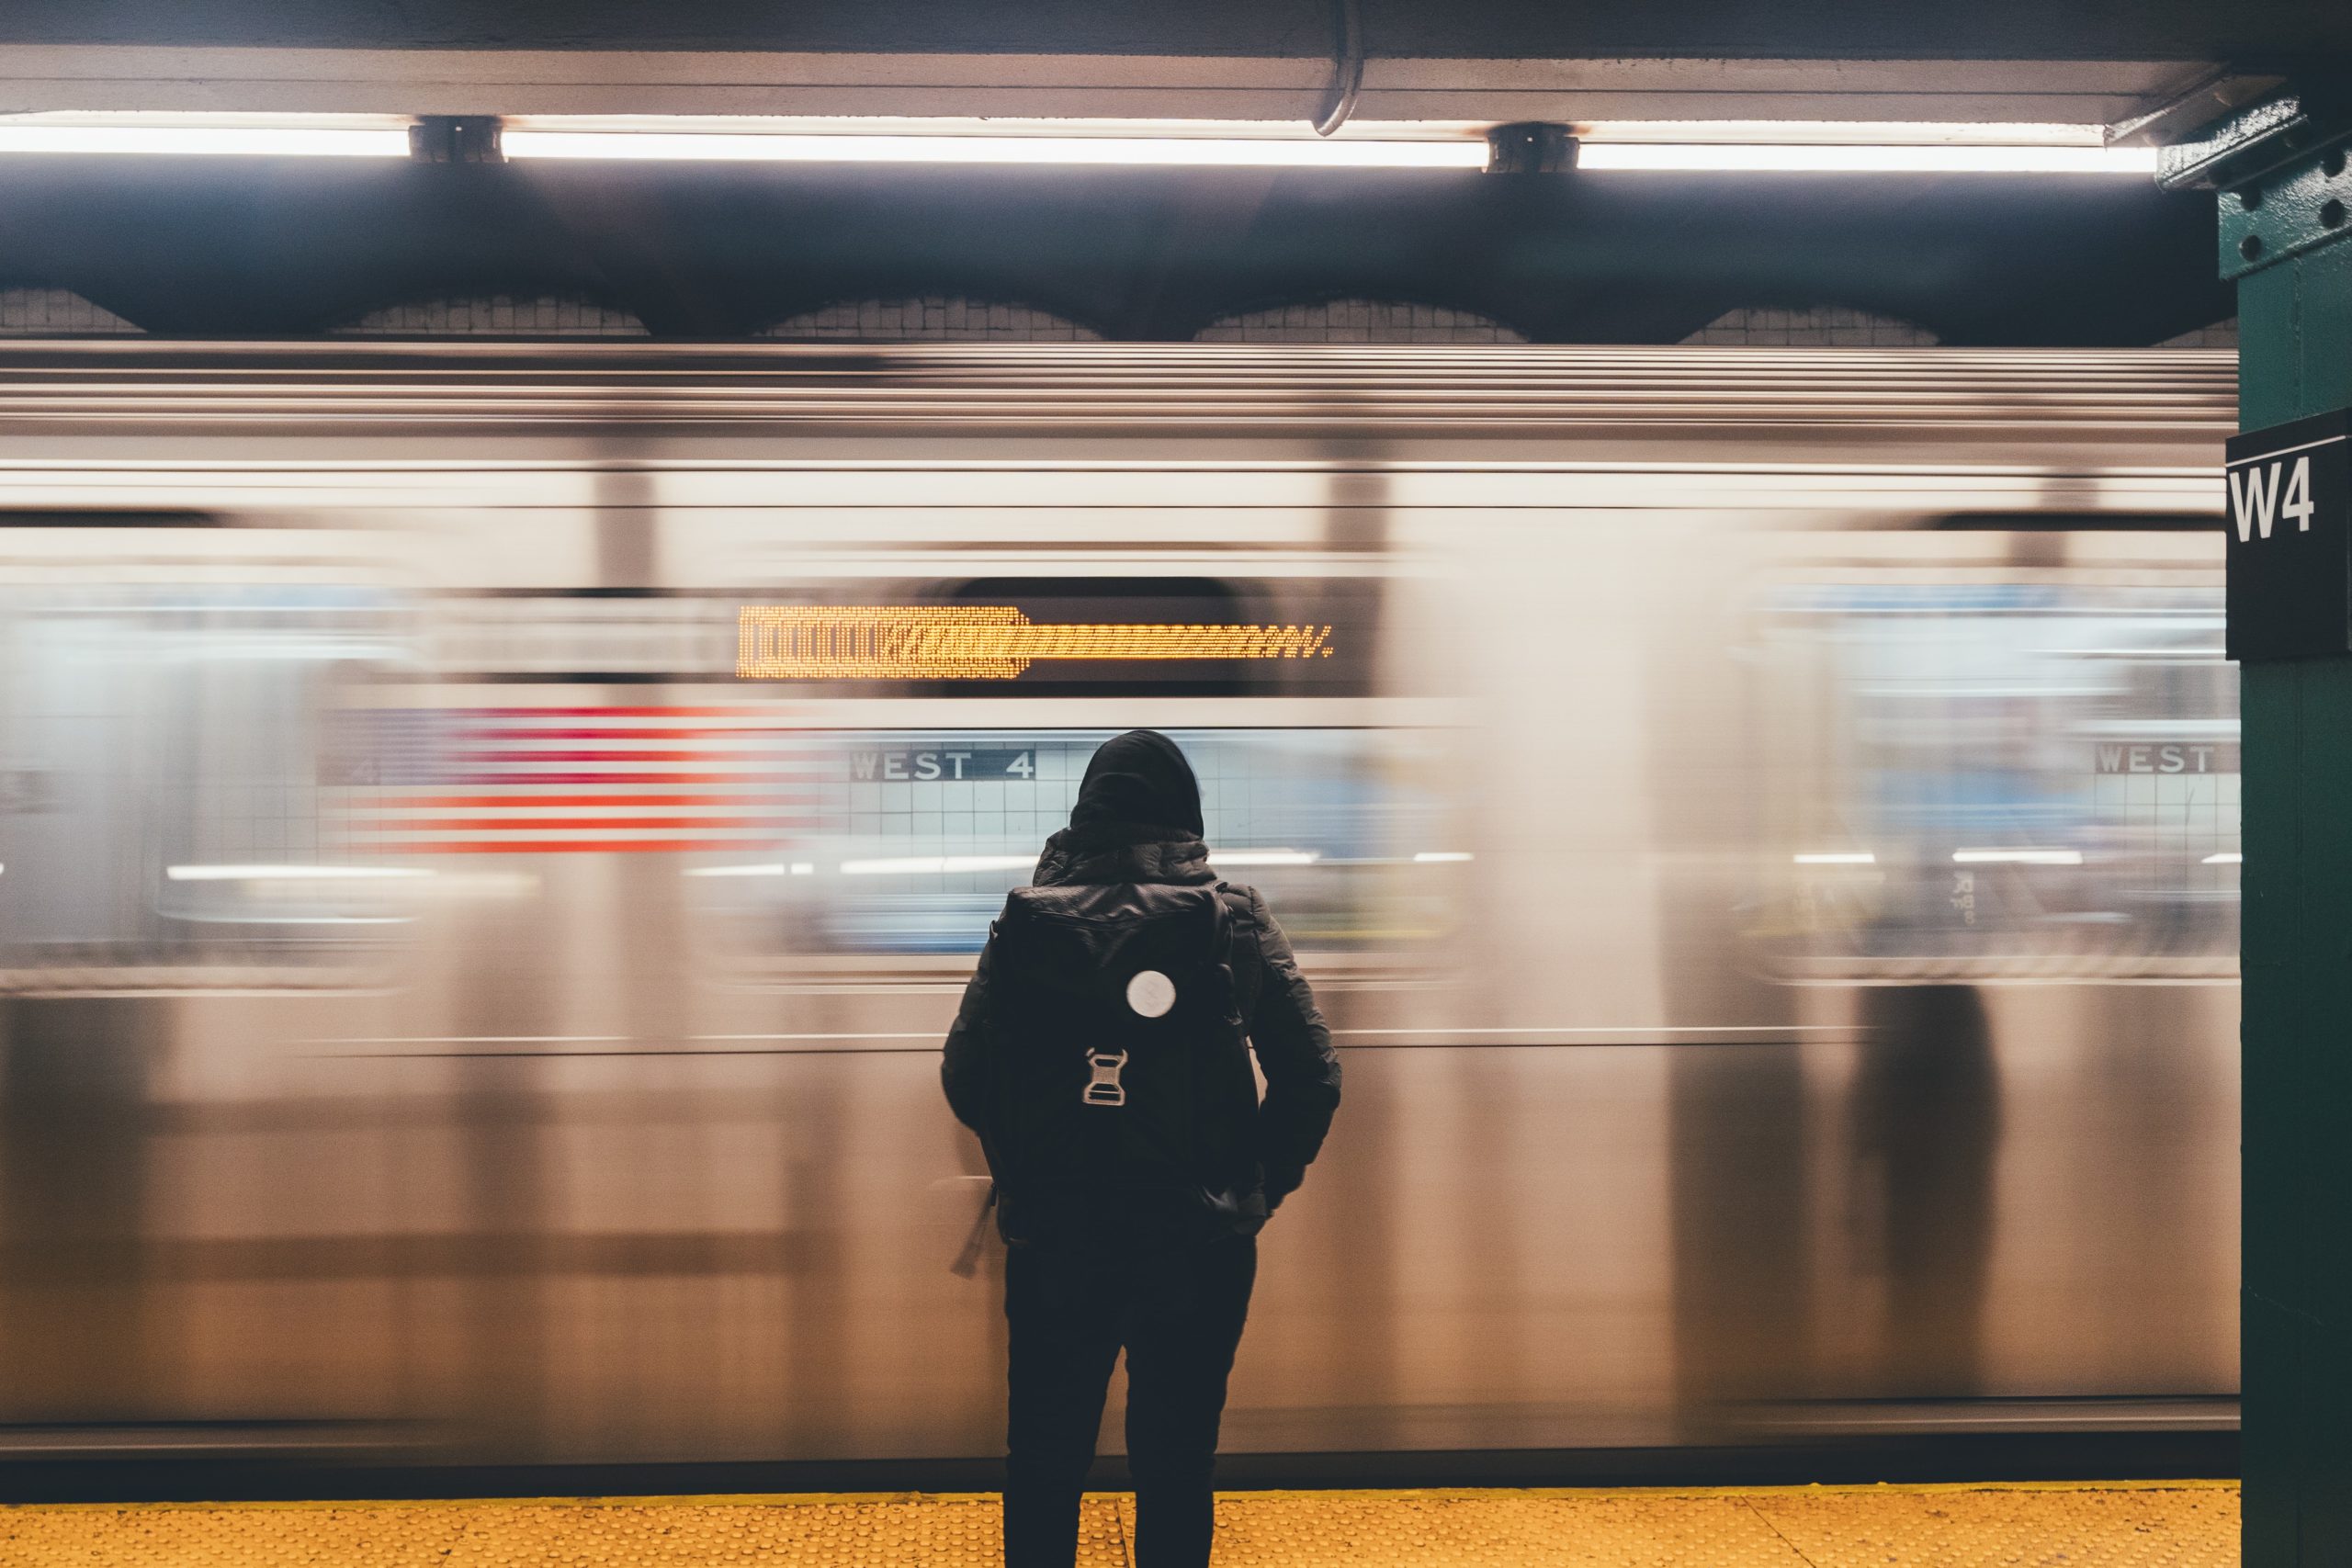 A subway car whizzing by a student waiting on the platform.